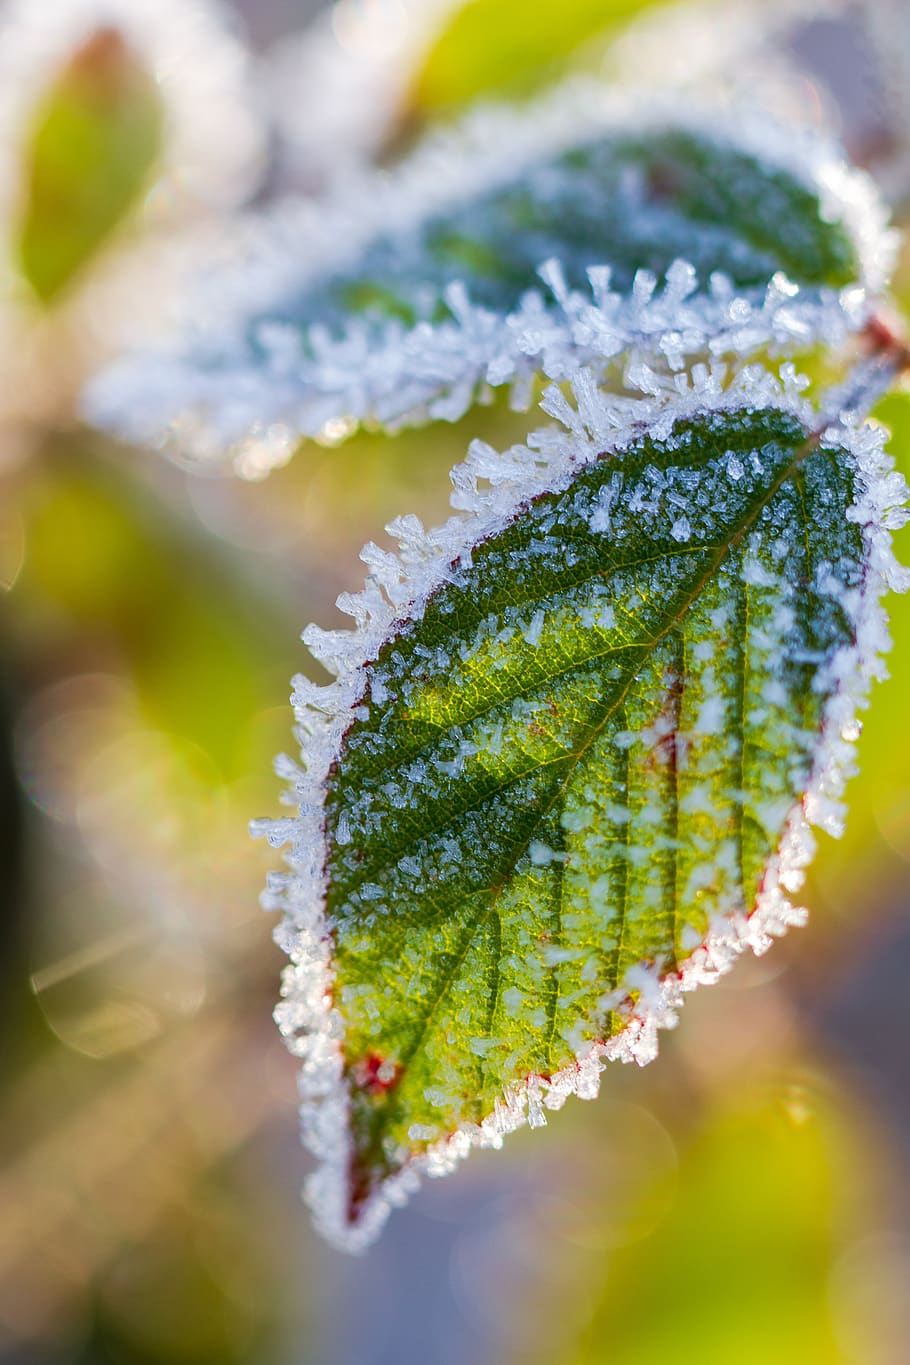 leaf, tree leaf, winter, nature, frost, cold, frozen, leaf veins, close-up, beauty in nature